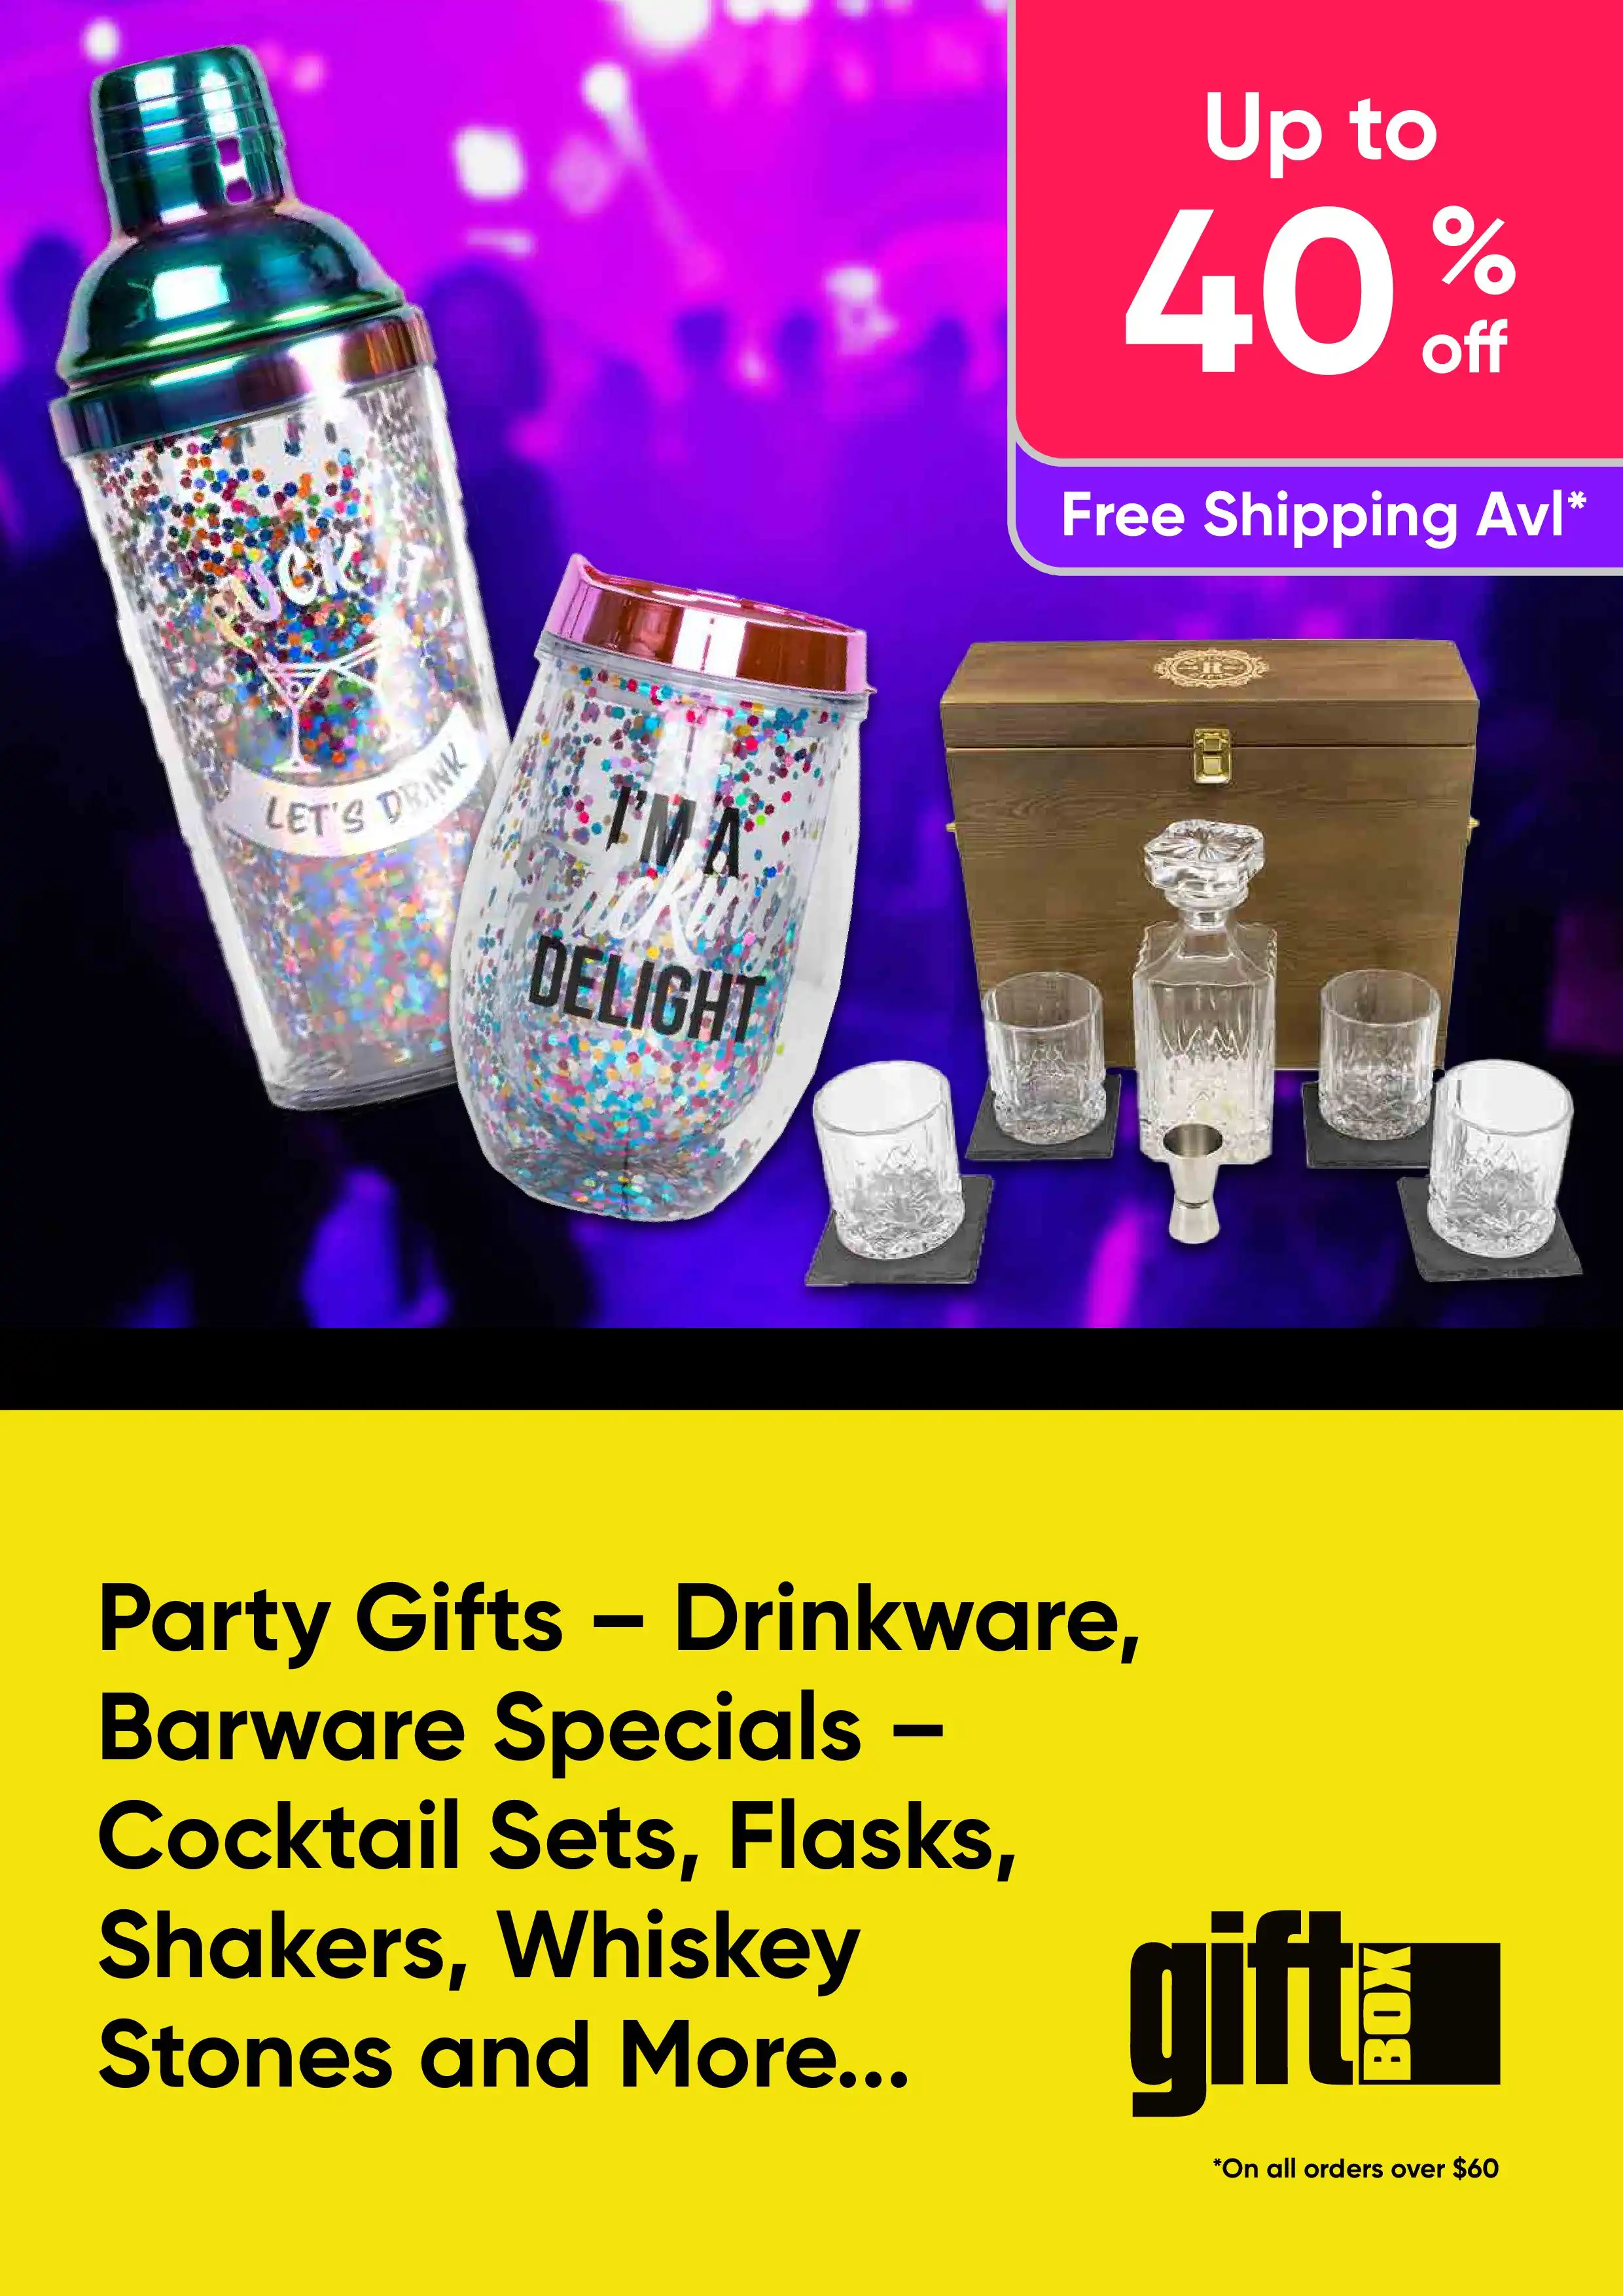 Party Gifts - Drinkware, Barware Specials - Cocktail Sets, Flasks, Shakers, Whiskey Stones and More - Up to 40% off